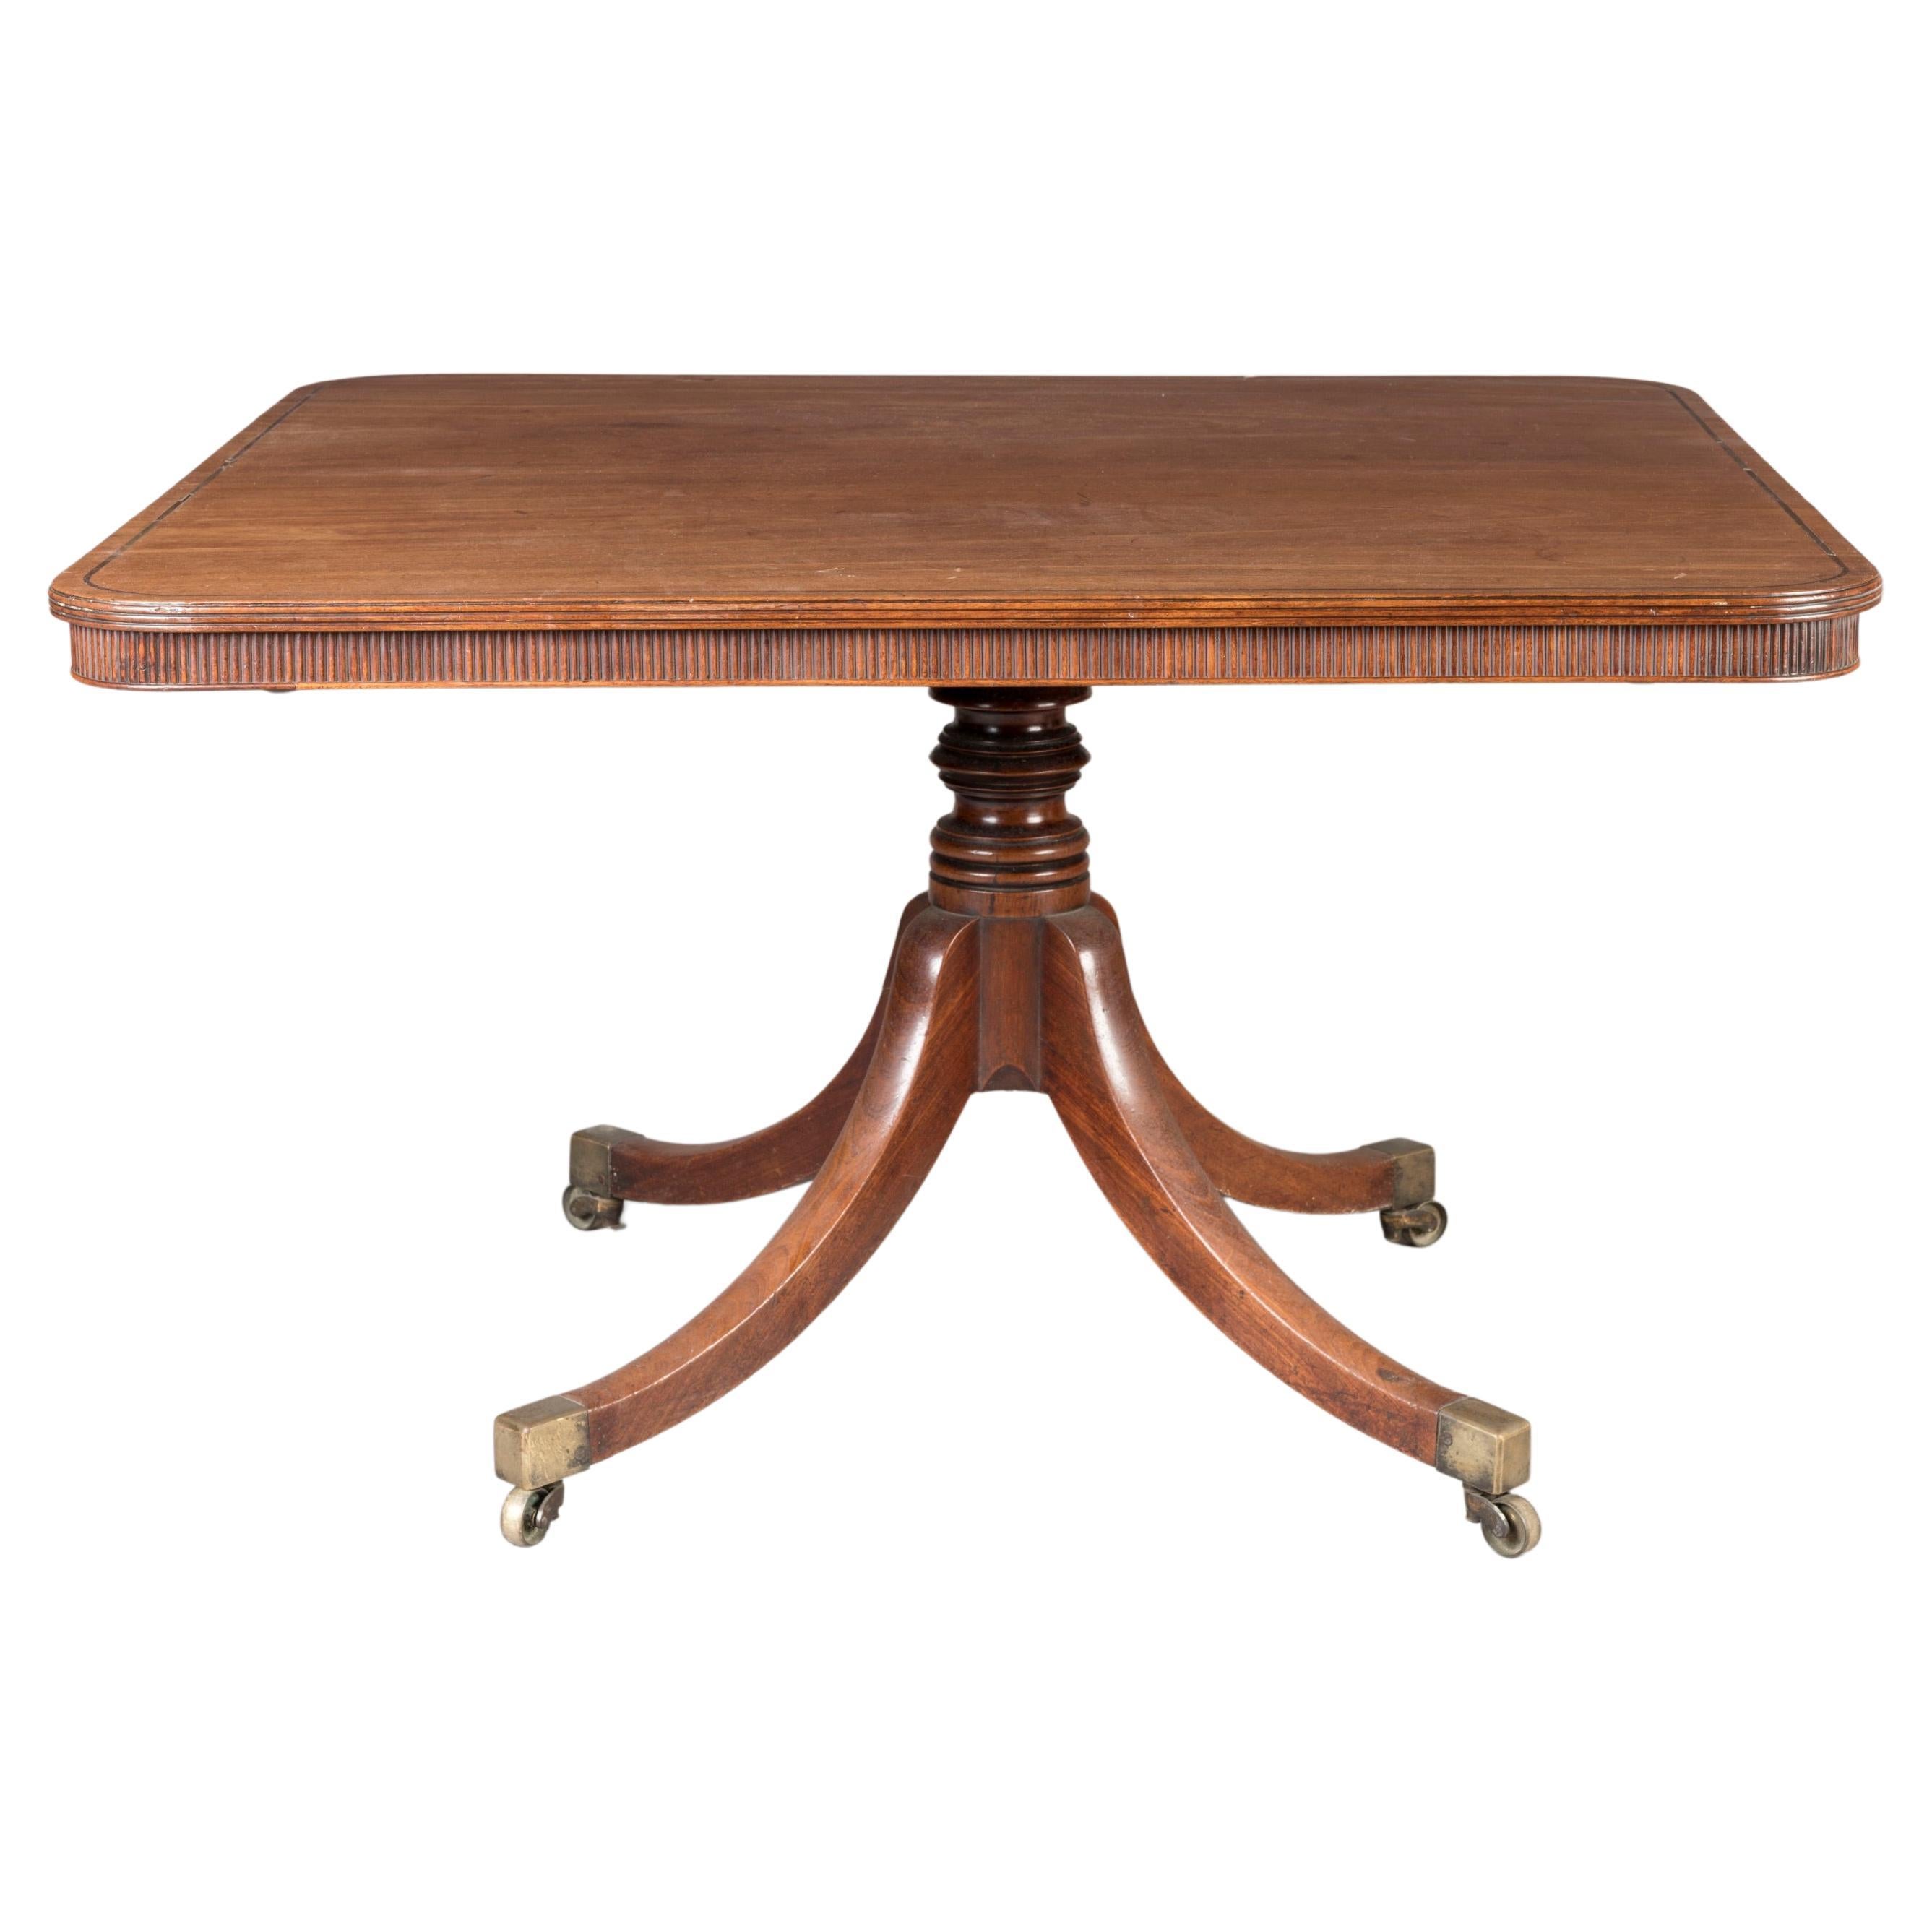 An Early 19th Century George III Period Mahogany Table on Brass Castors For Sale